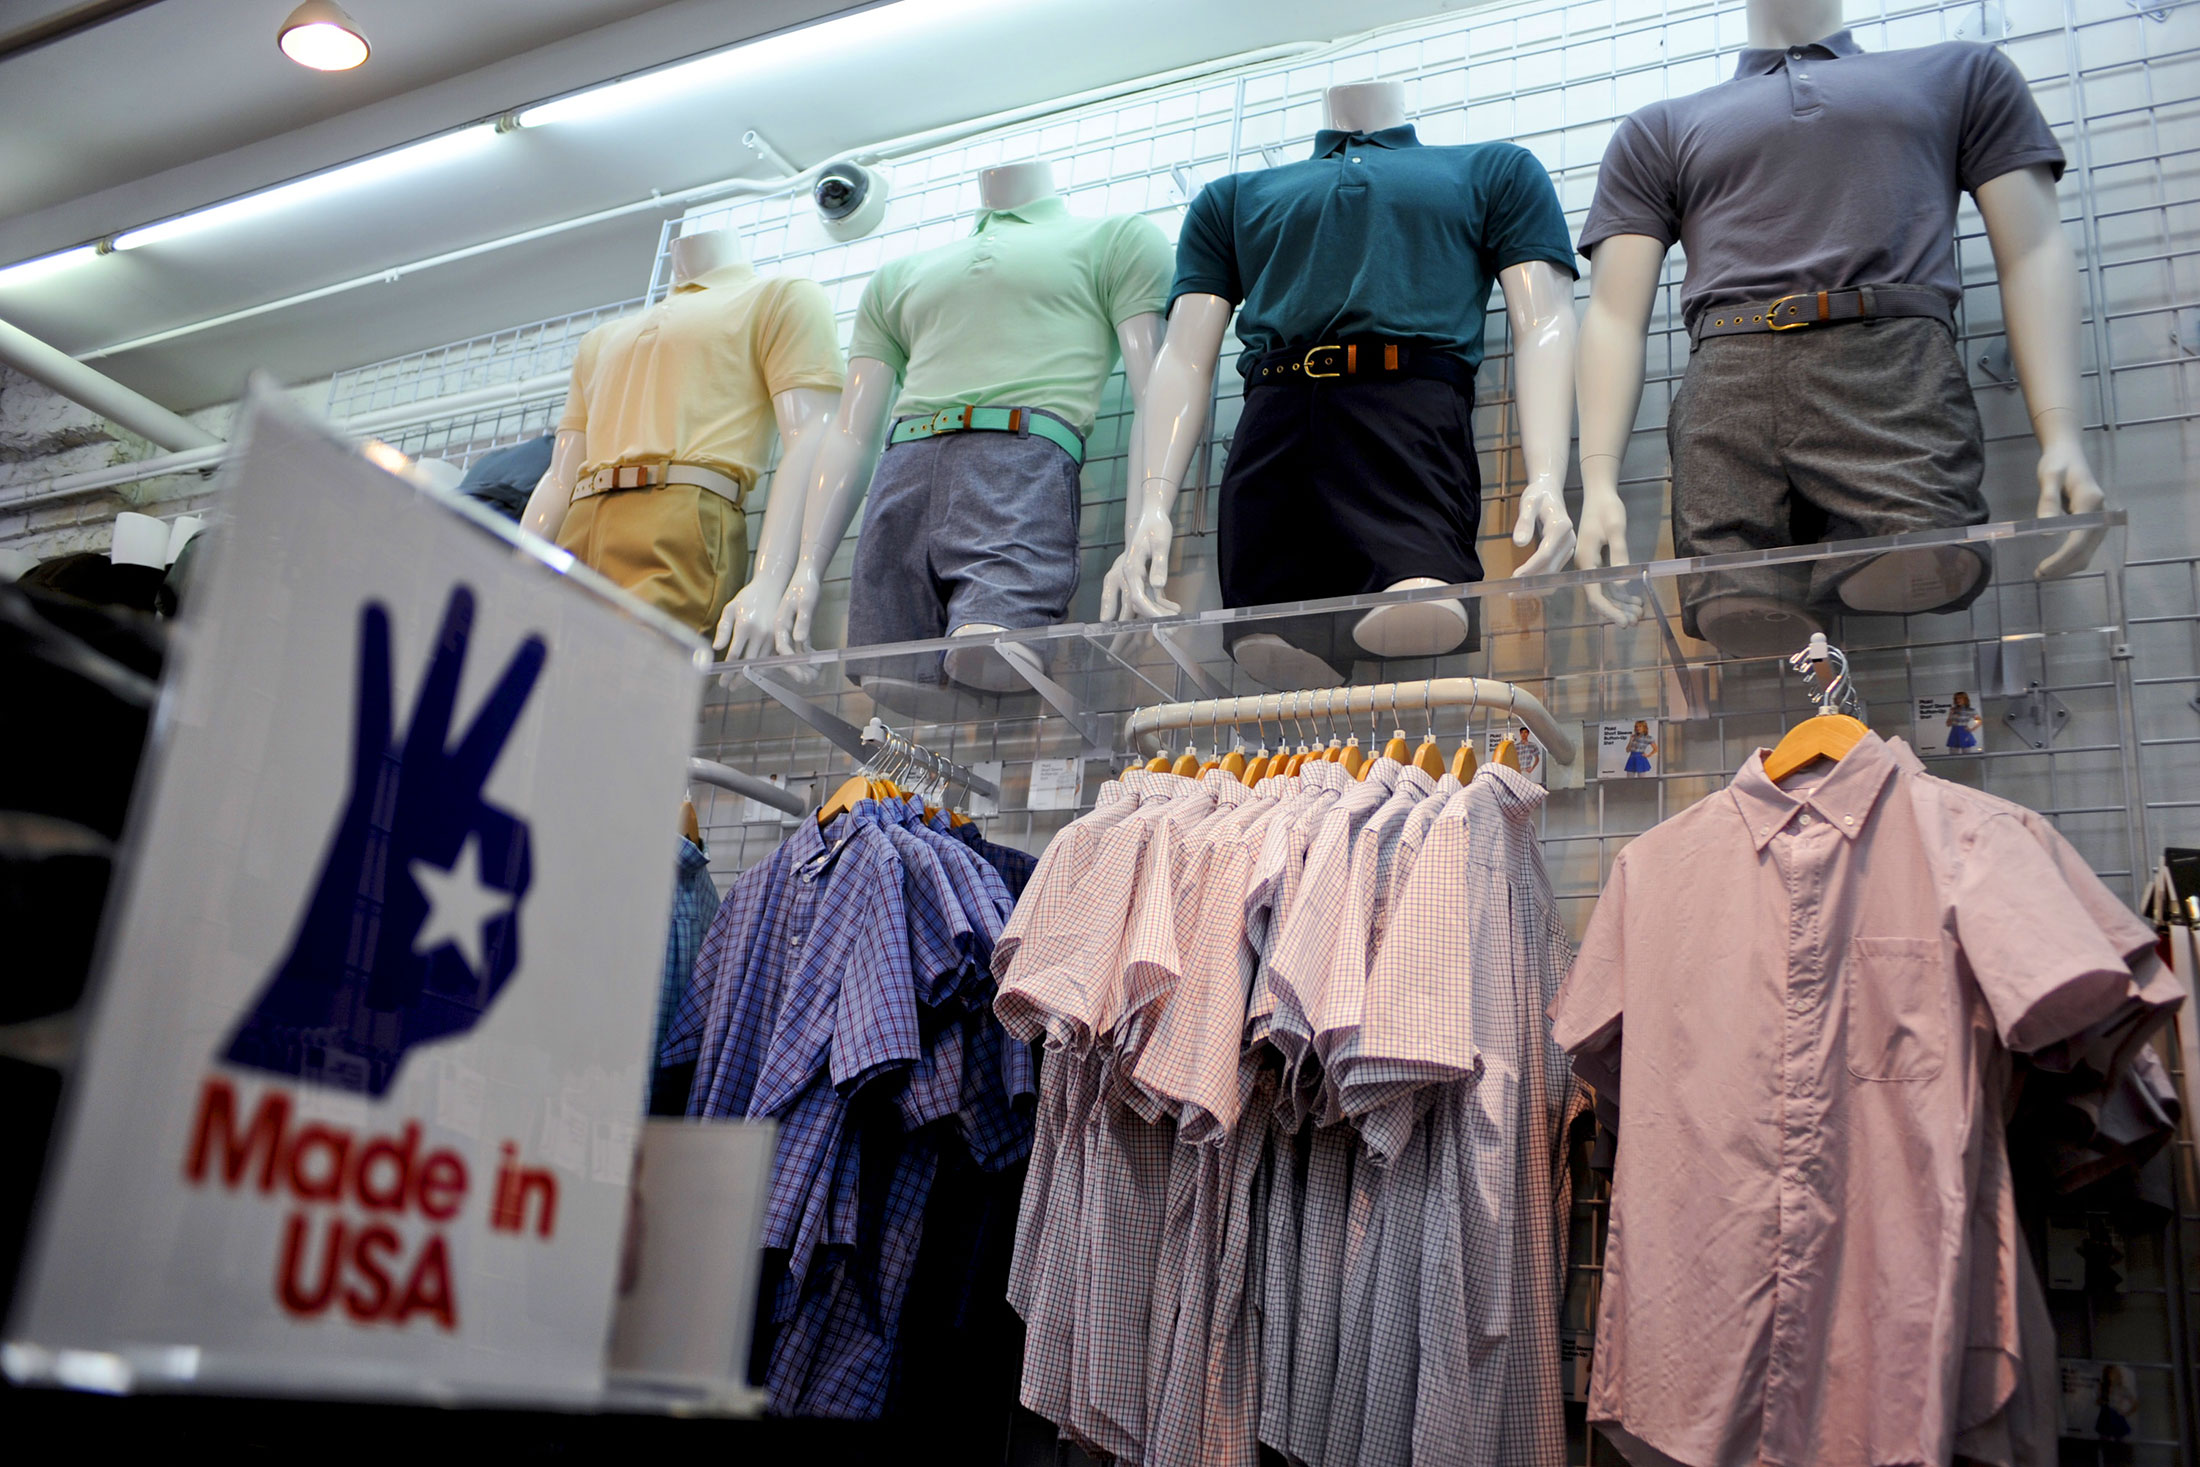 American Apparel Seeks Bankruptcy Protection a Second Time - Bloomberg